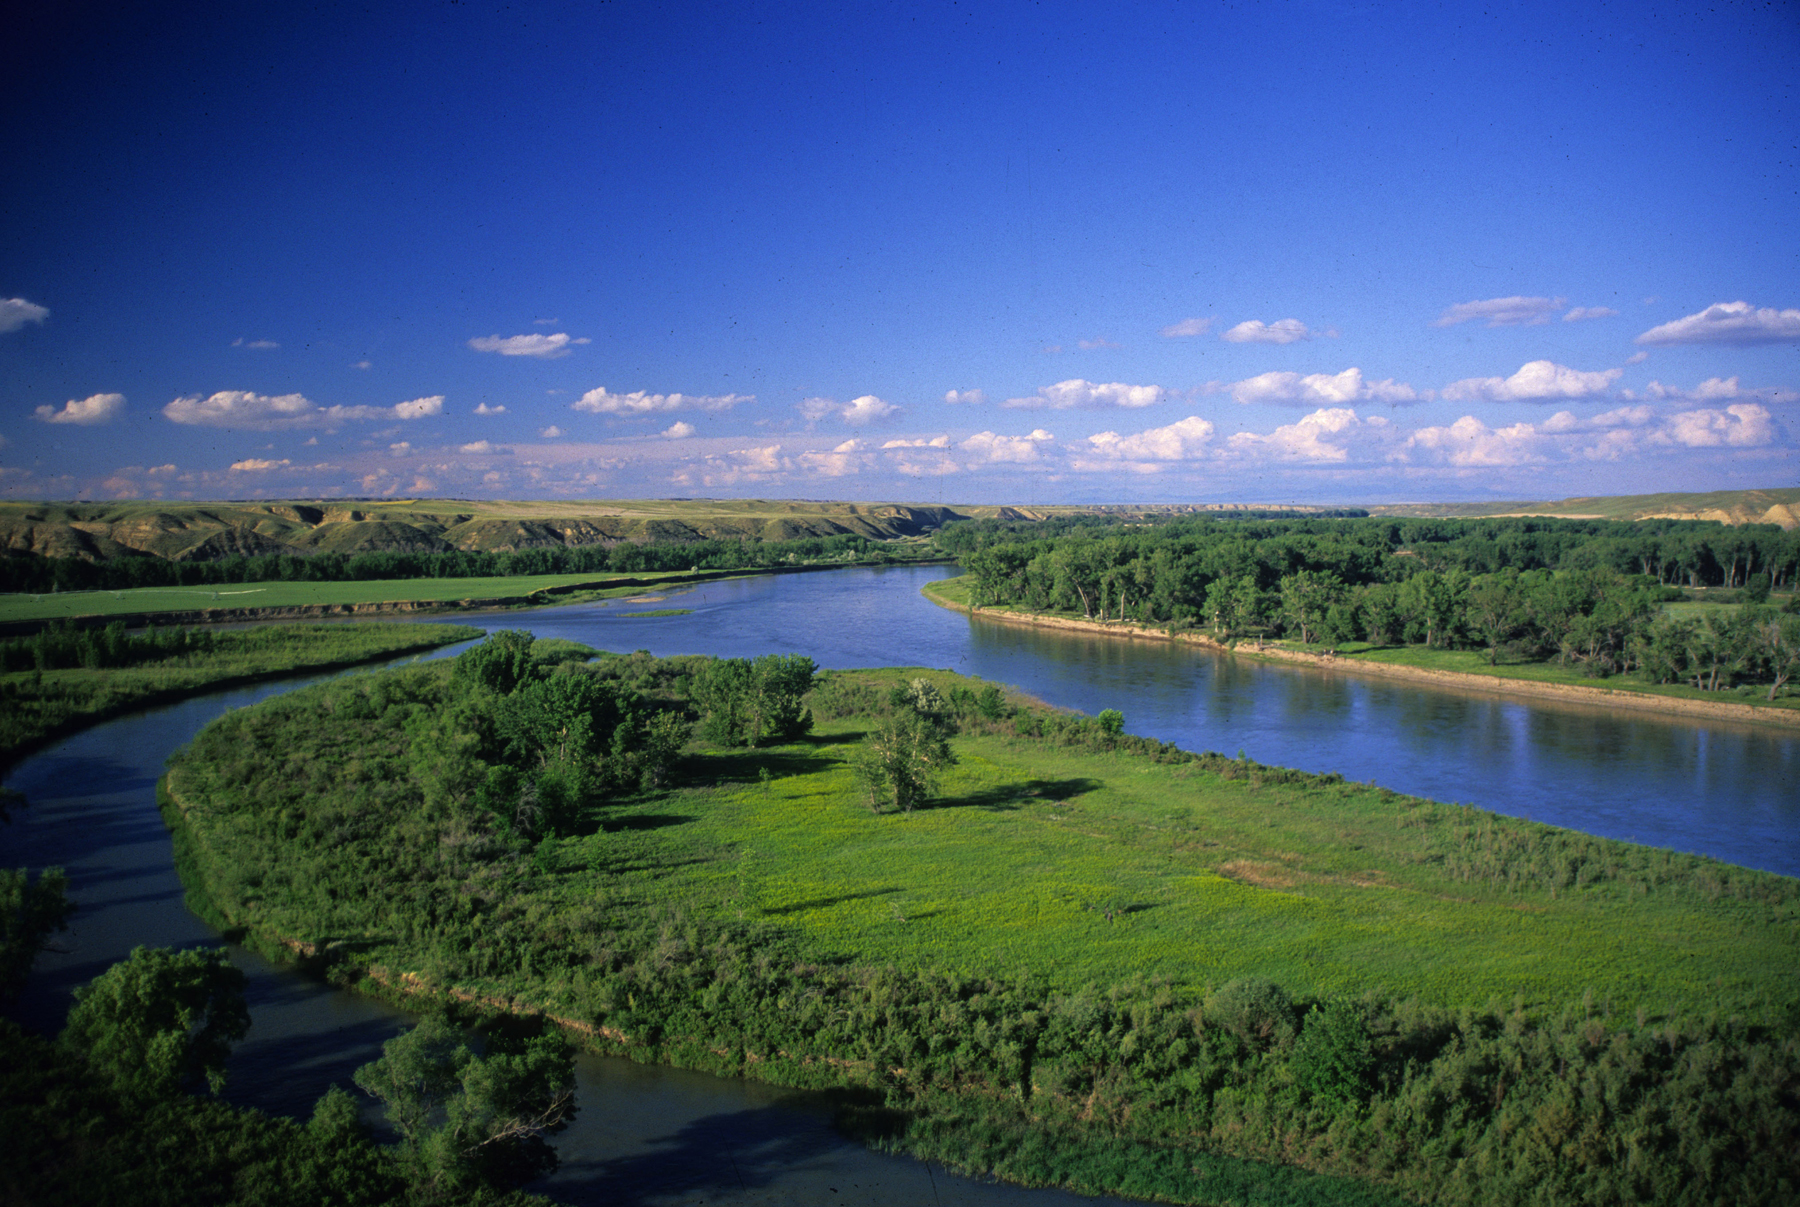 The Marias River enters the Missouri River on a bright summer day.